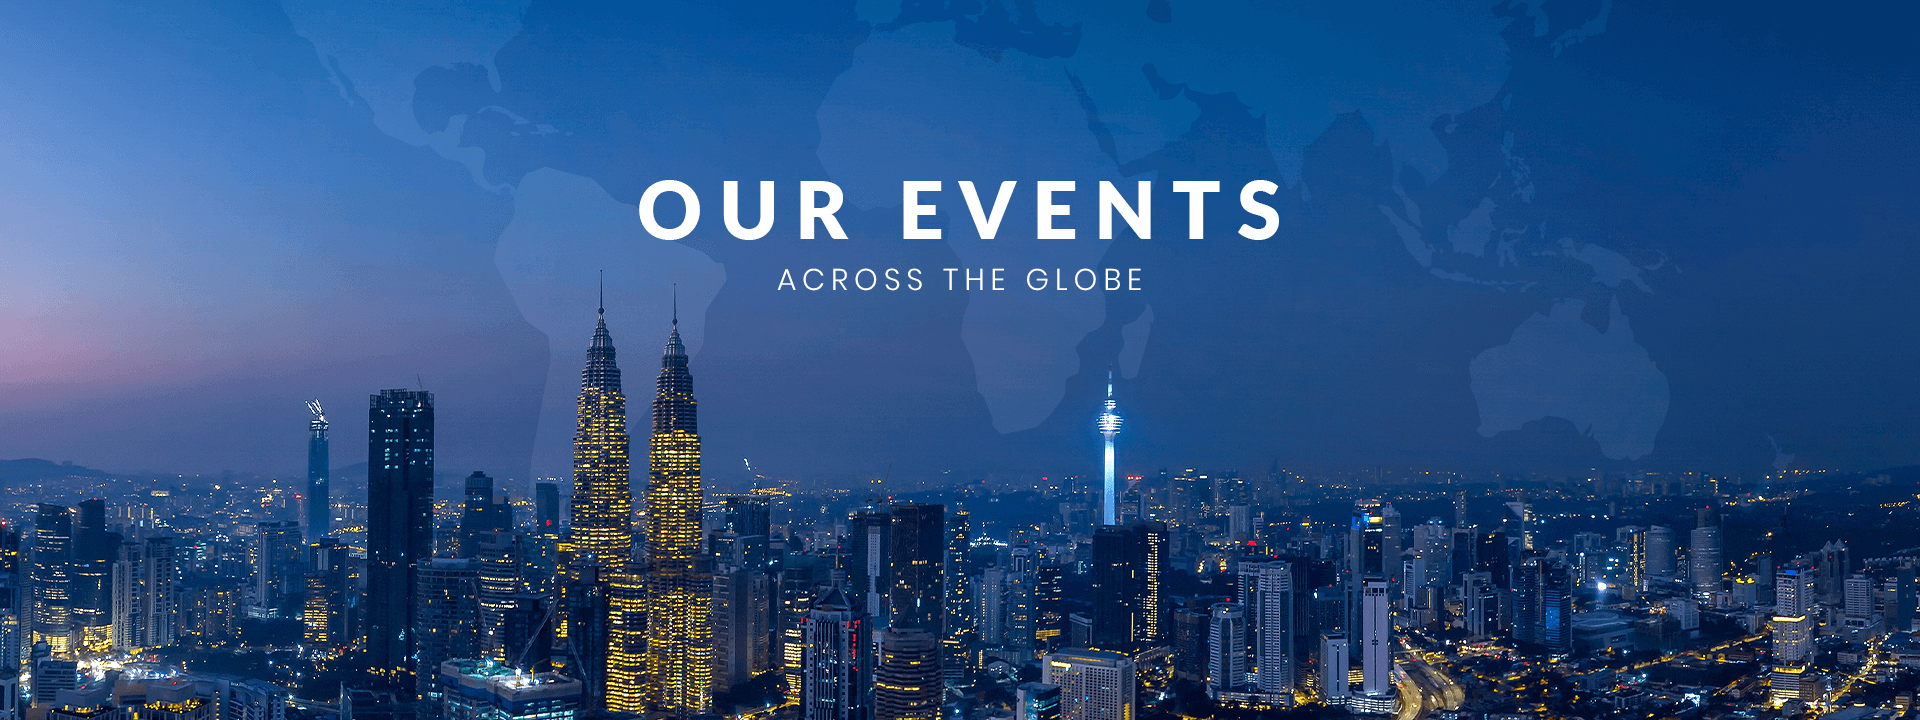 Our events -Across the globe